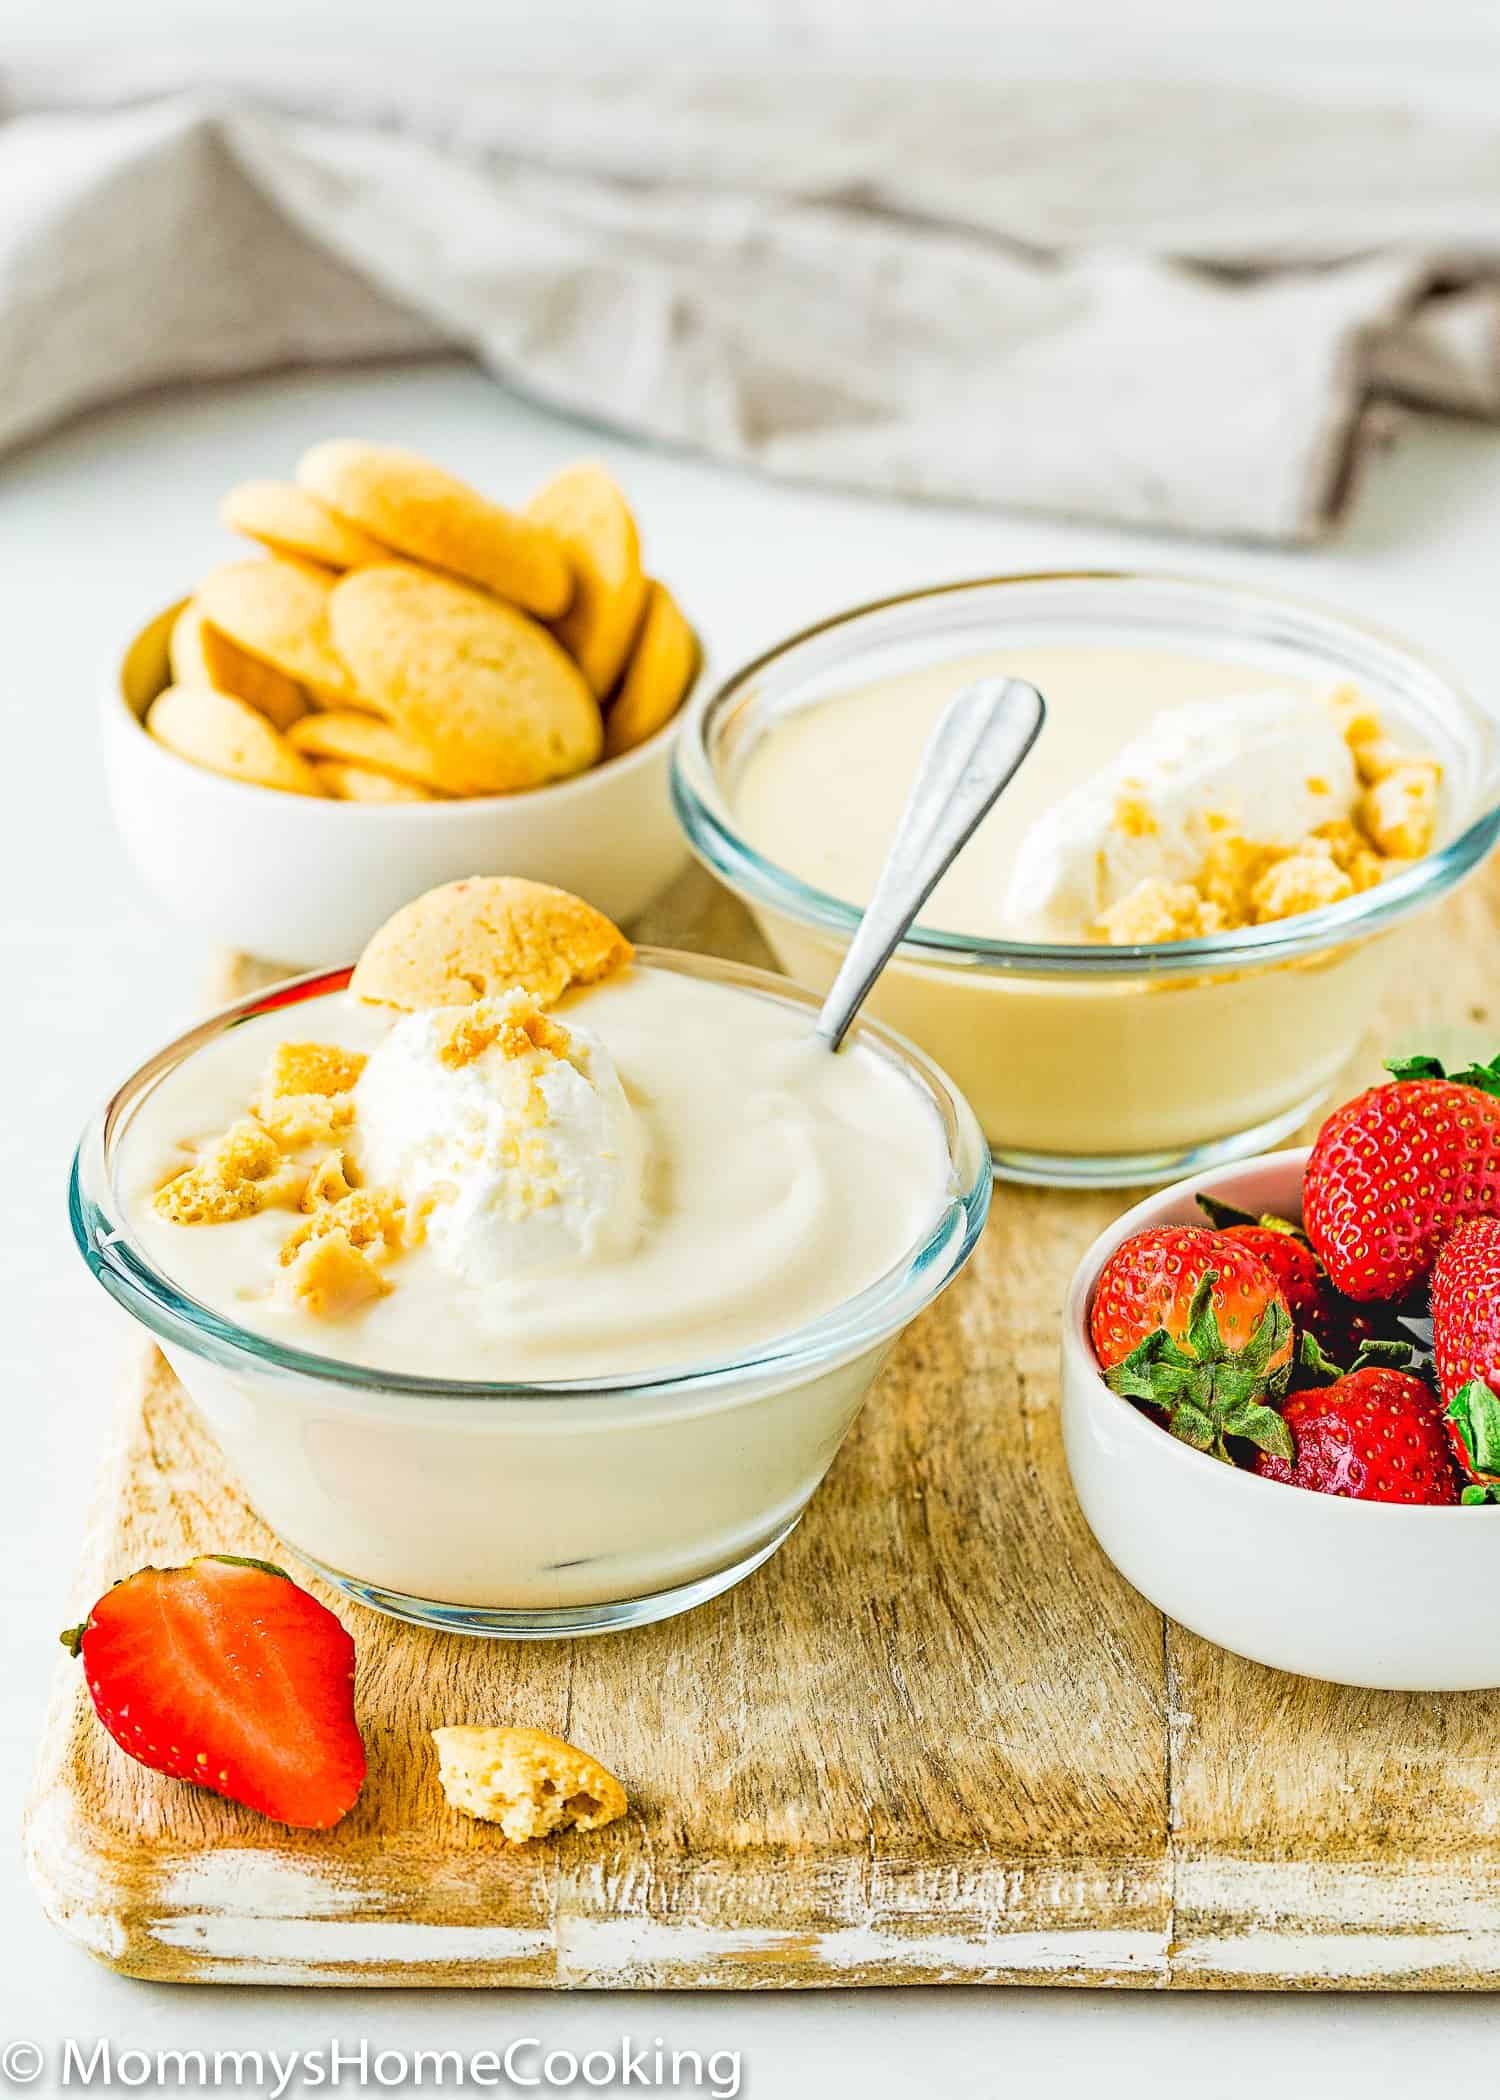 two bowls with Egg free homemade vanilla pudding with whipped cream over a wooden board with fresh strawberries, more vanilla wafers and a gray kitchen towel.